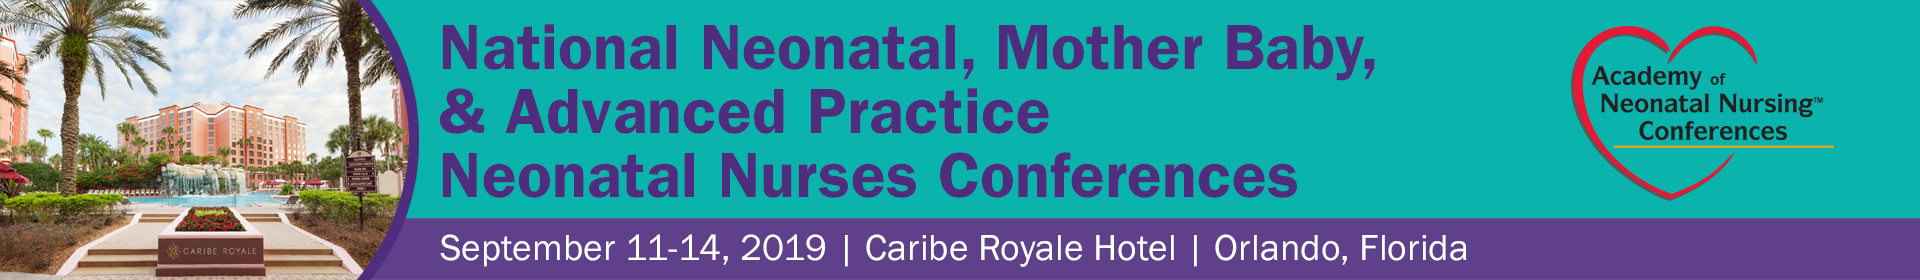 2019 National Neonatal/Advanced Practice/Mother Baby Nurses Conference Event Banner